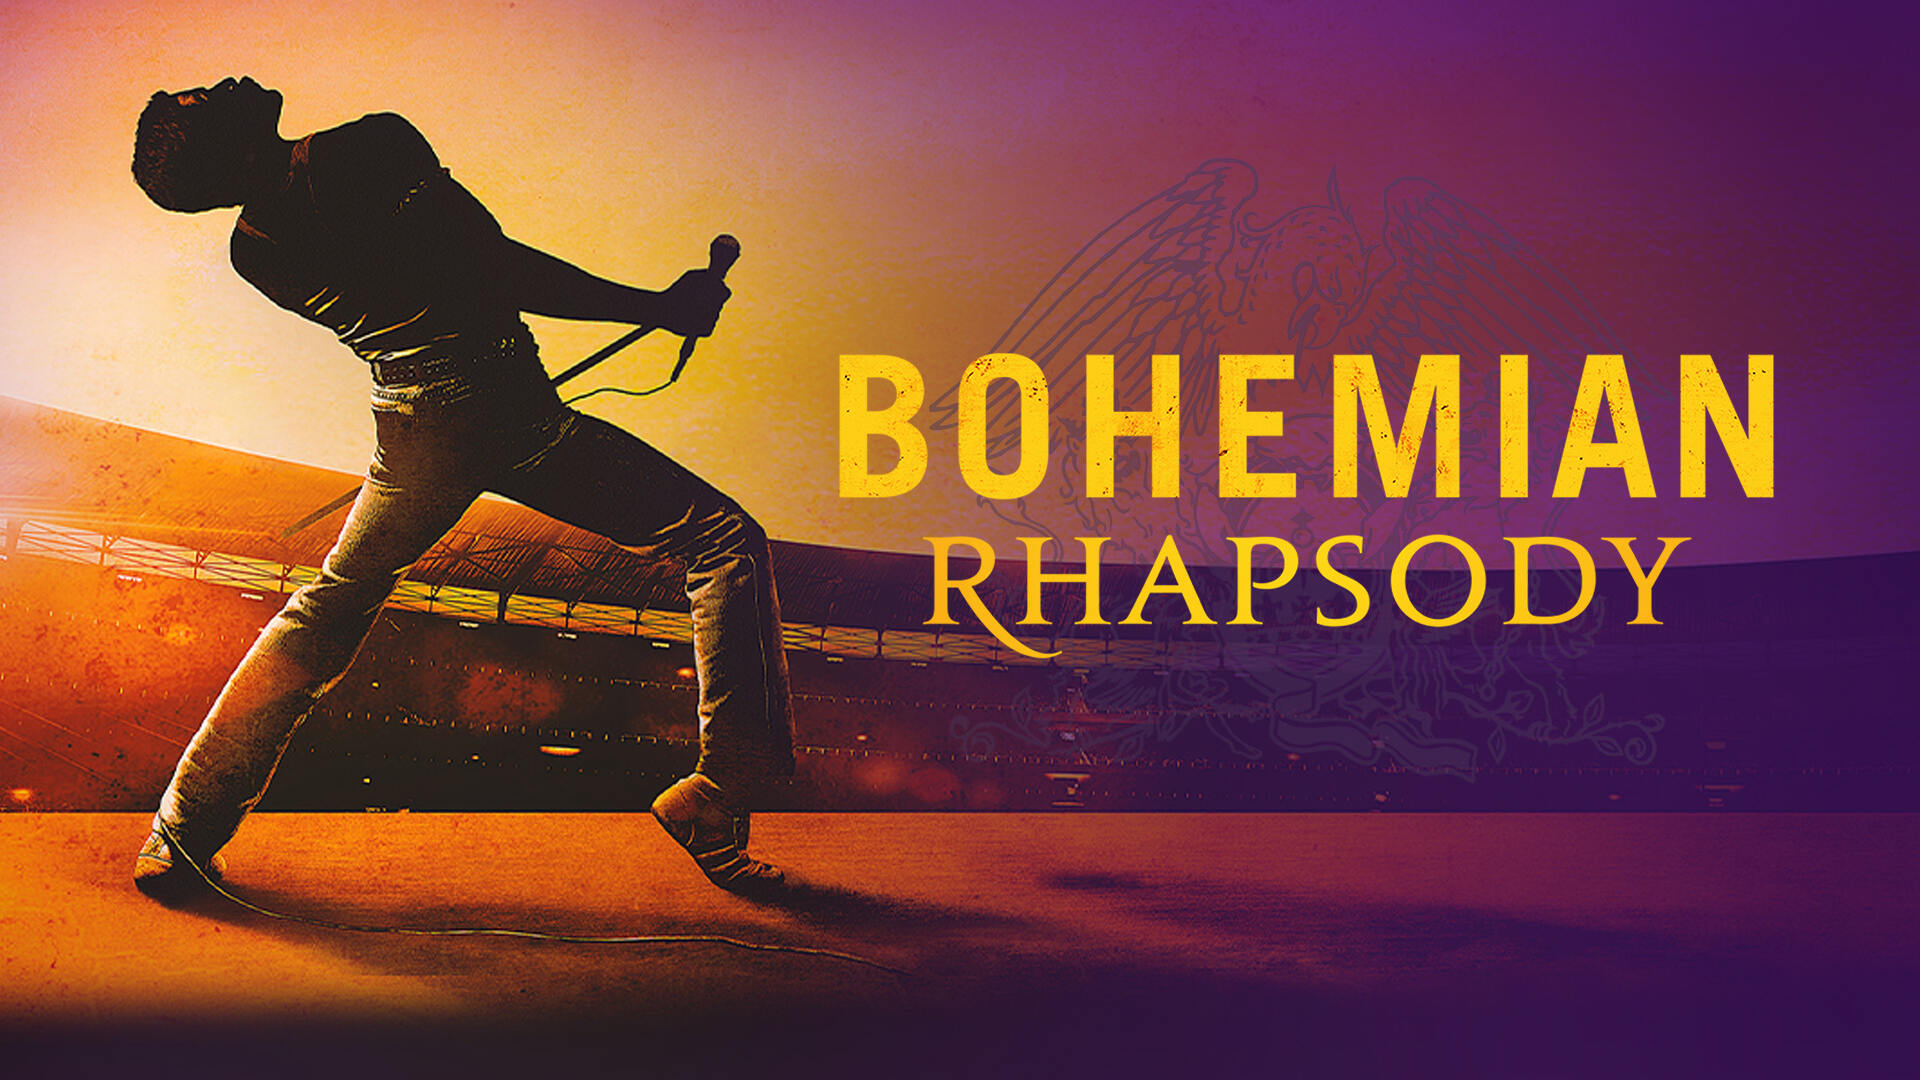 38 Facts about the movie Bohemian Rhapsody - Facts.net